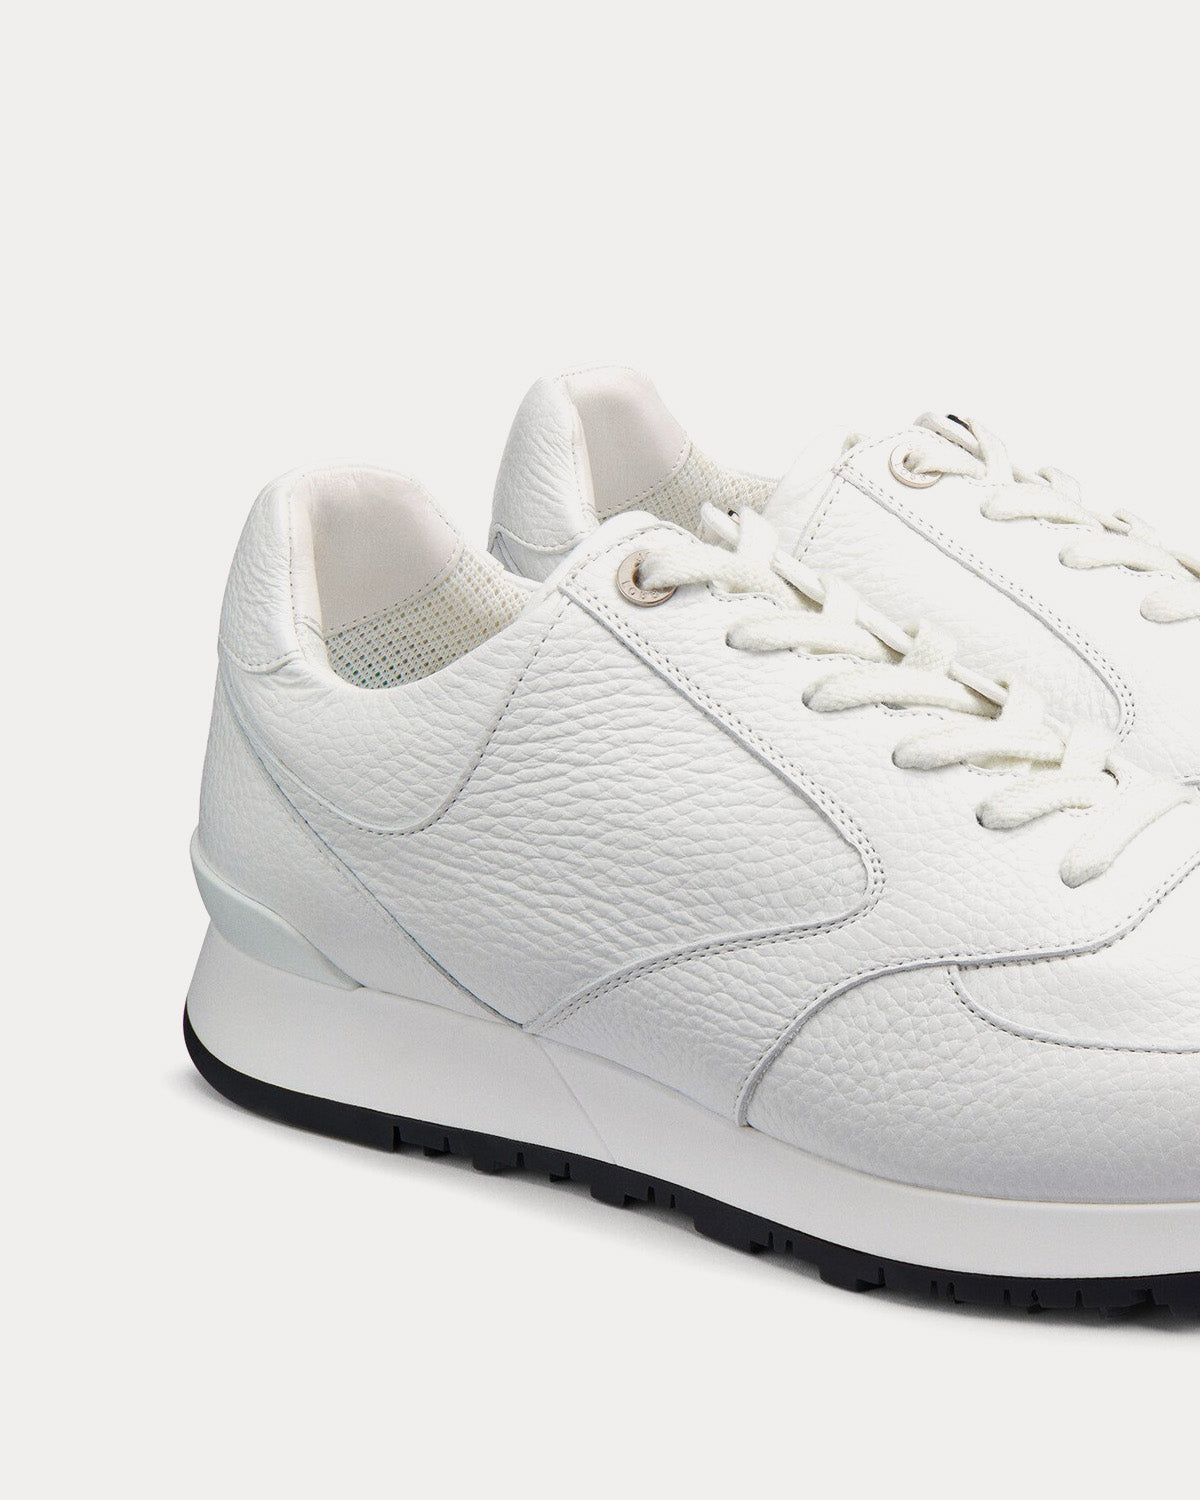 John Lobb - Foundry Grained Leather White Low Top Sneakers